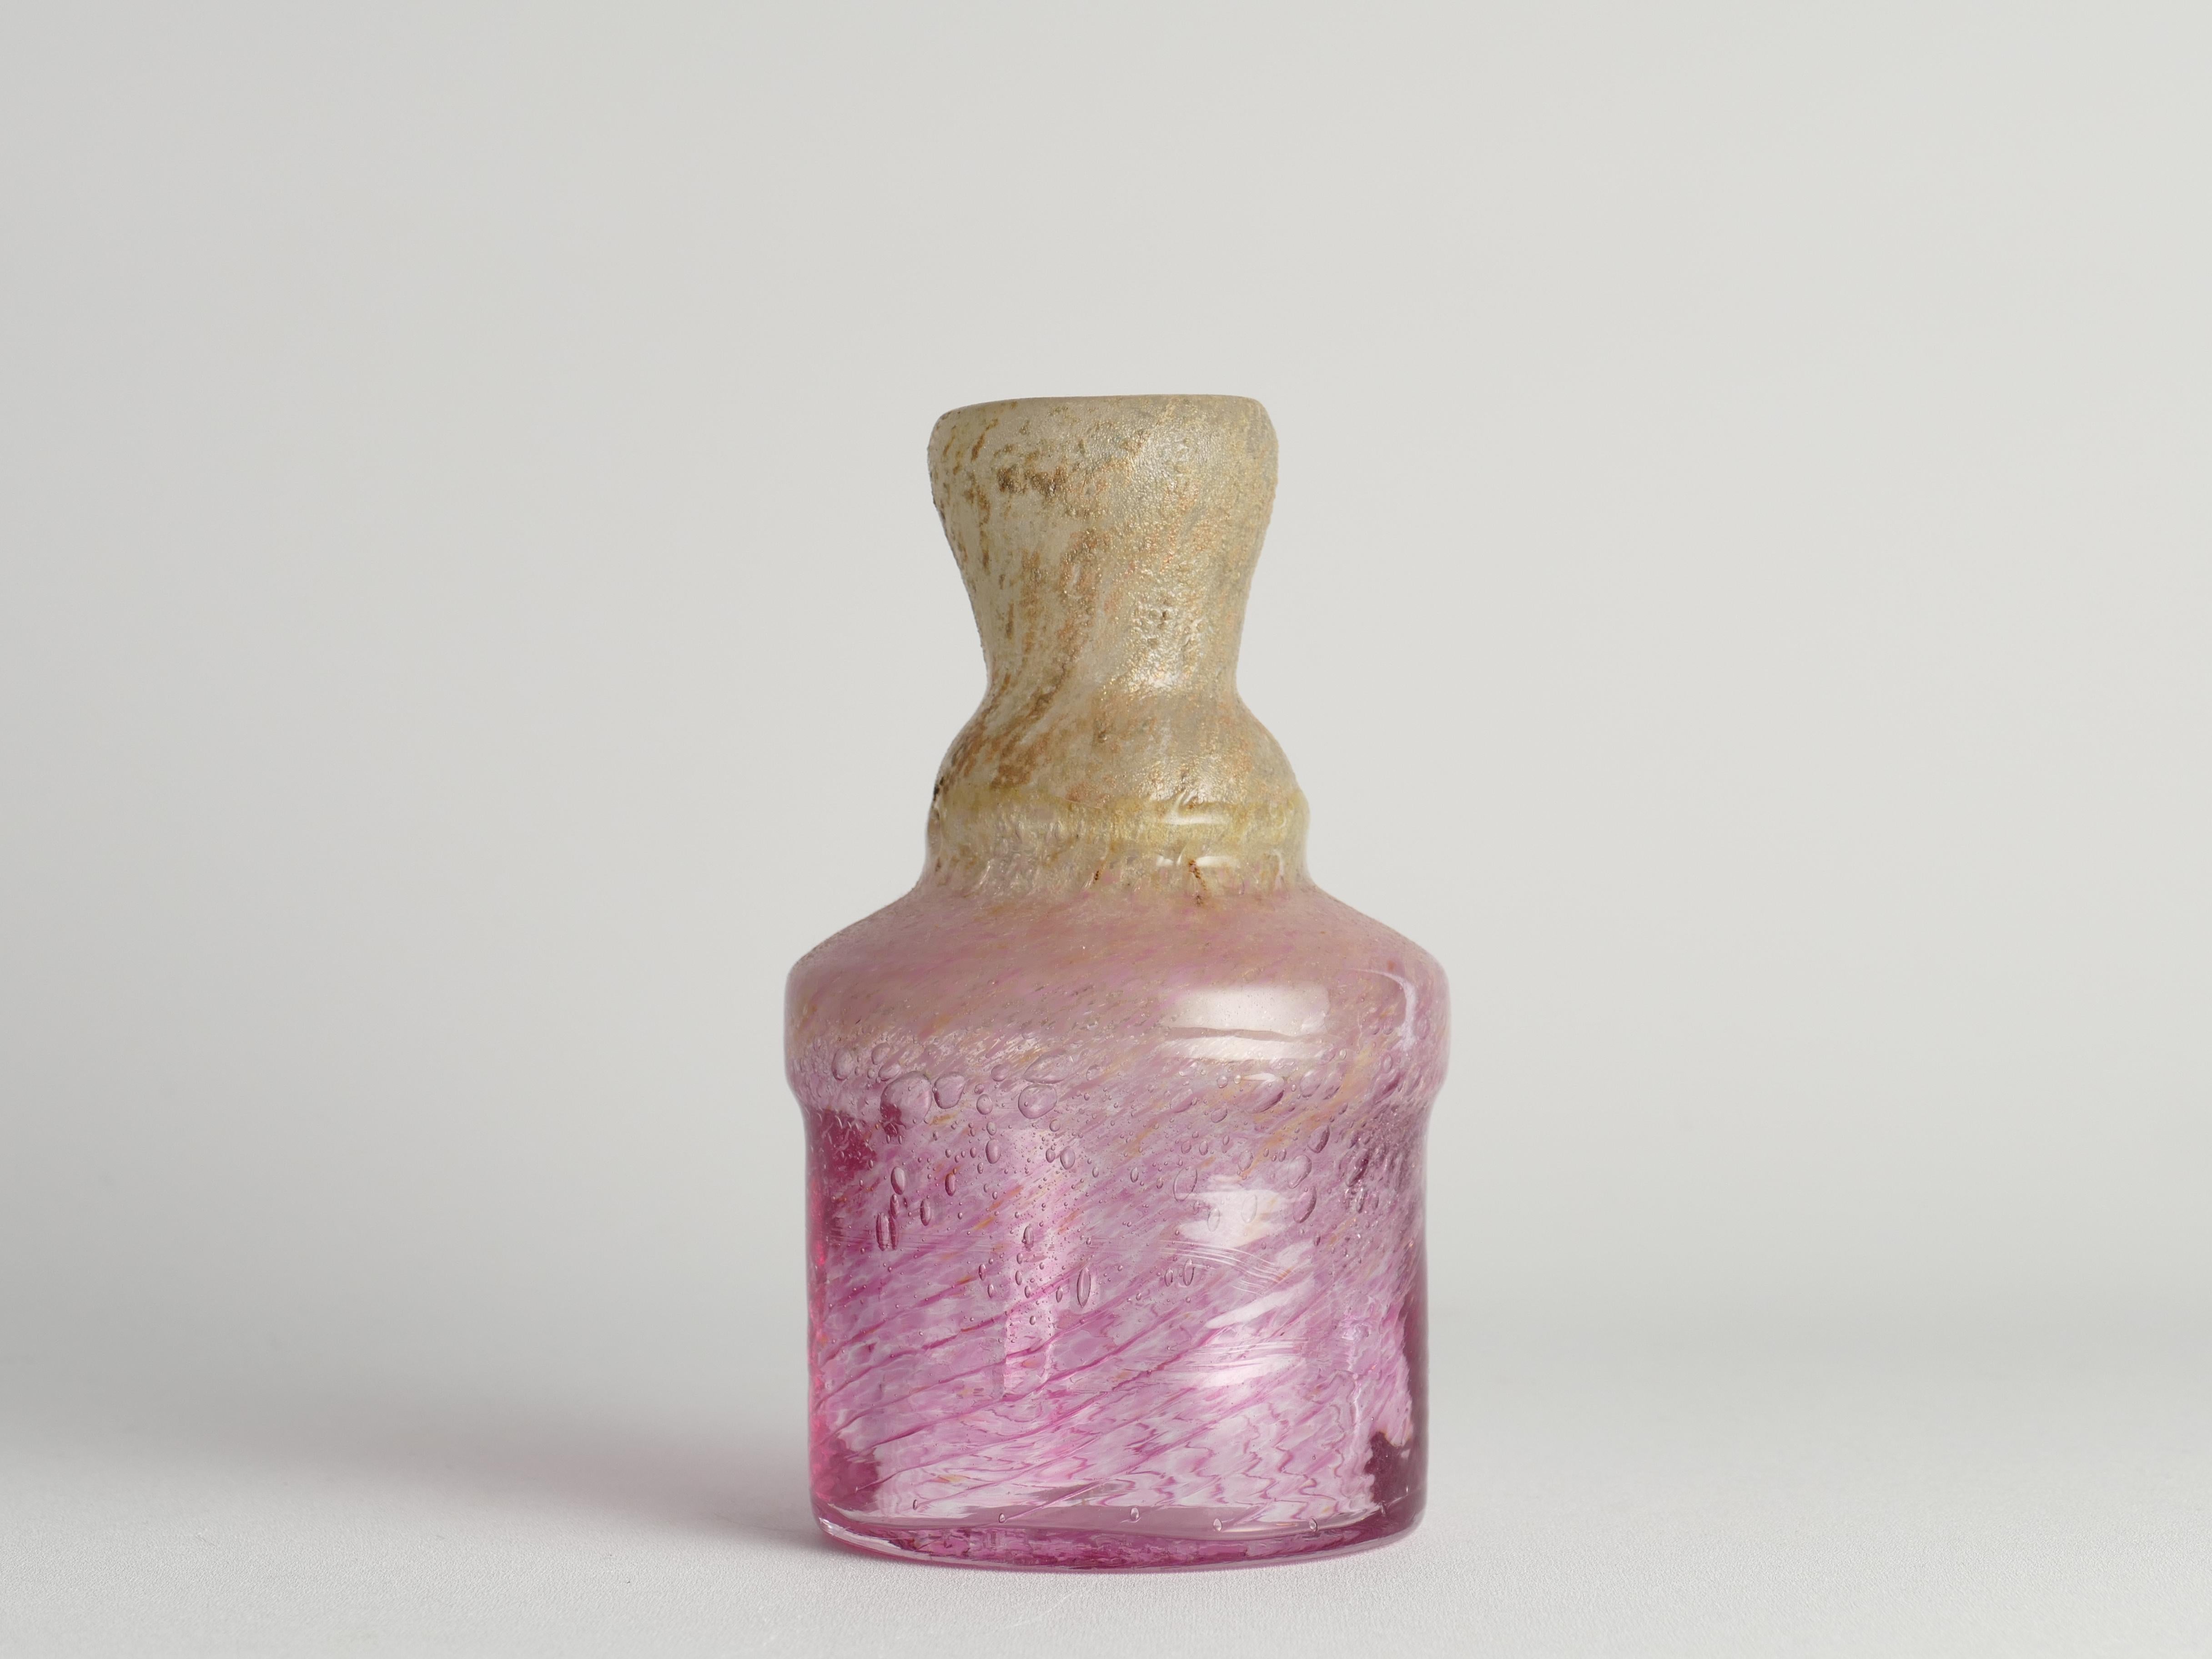 Hand-Crafted Unique Bubblegum Pink and Yellow Art Glass Vase by Milan Vobruba, Sweden 1980s For Sale